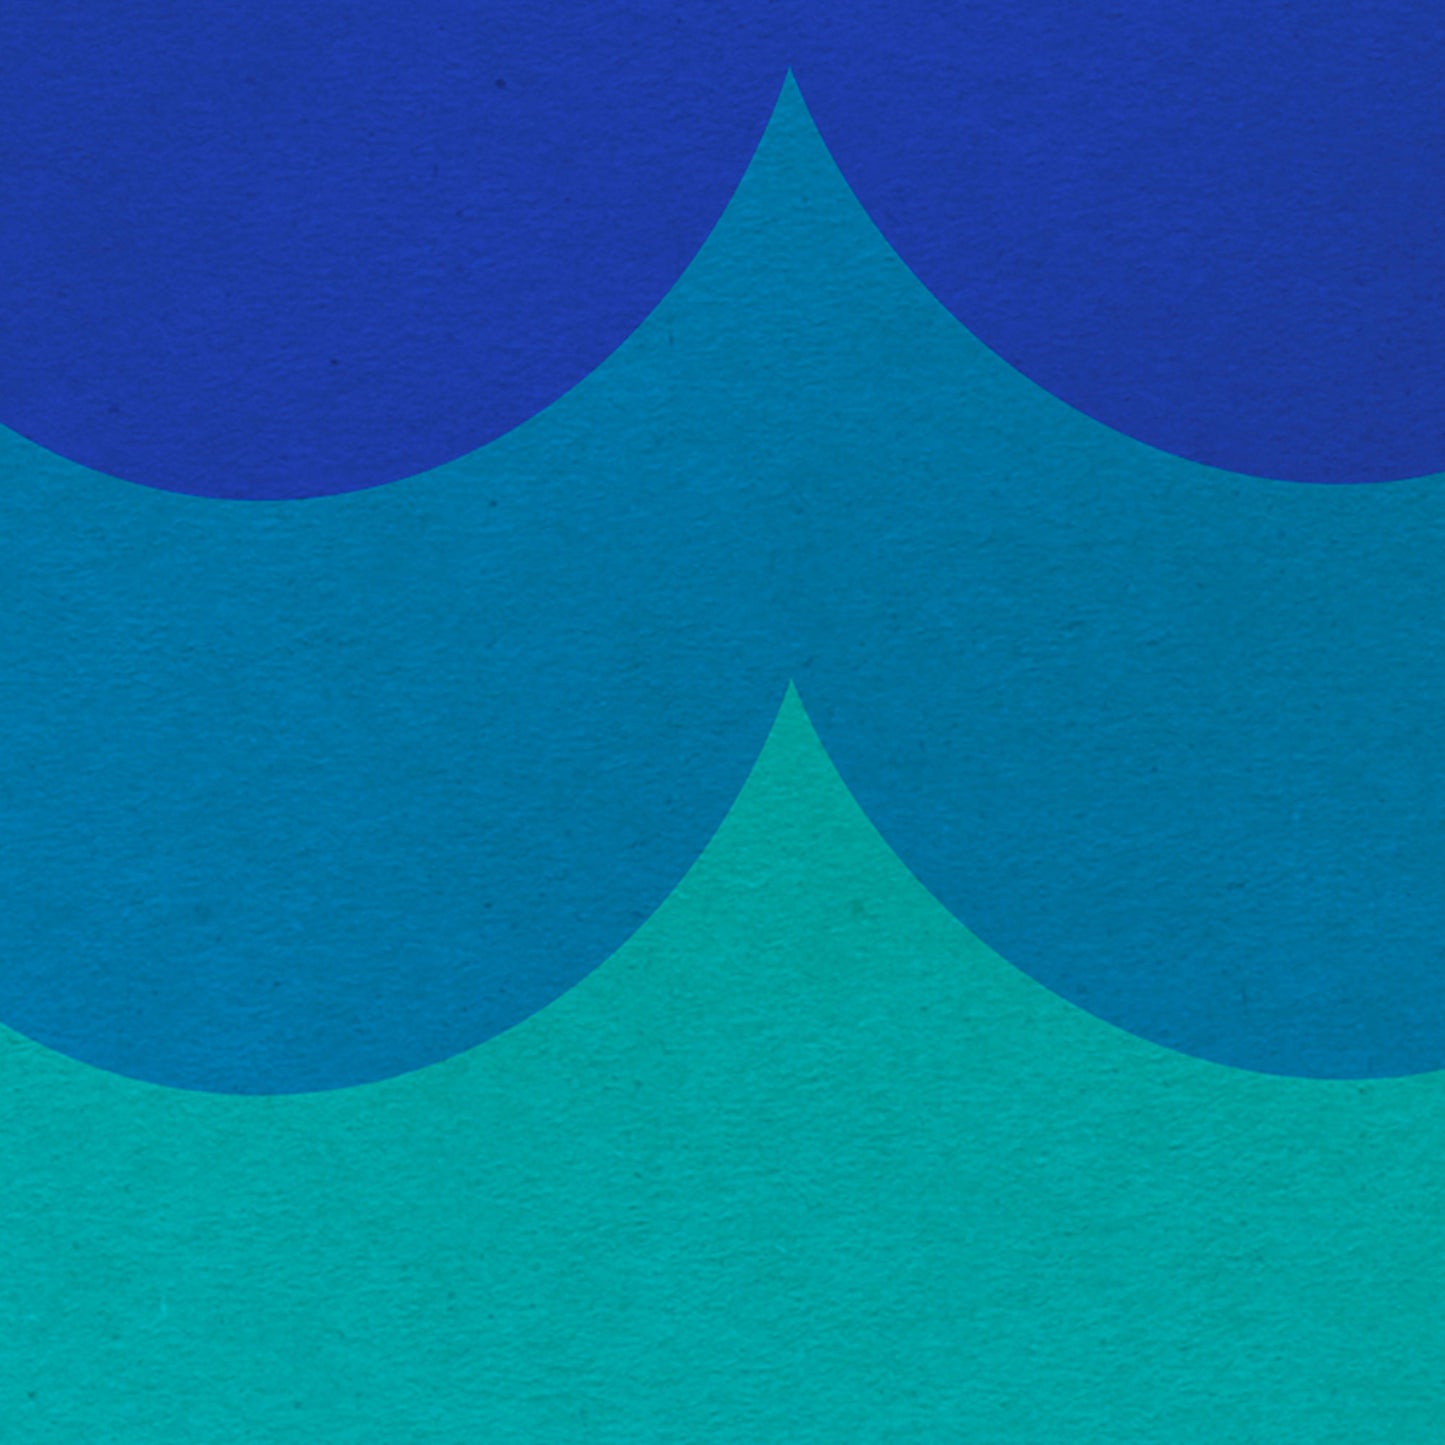 Close-up detail of the 'Formentera Waves' minimalist poster by Cha™, showcasing its artistic intricacies